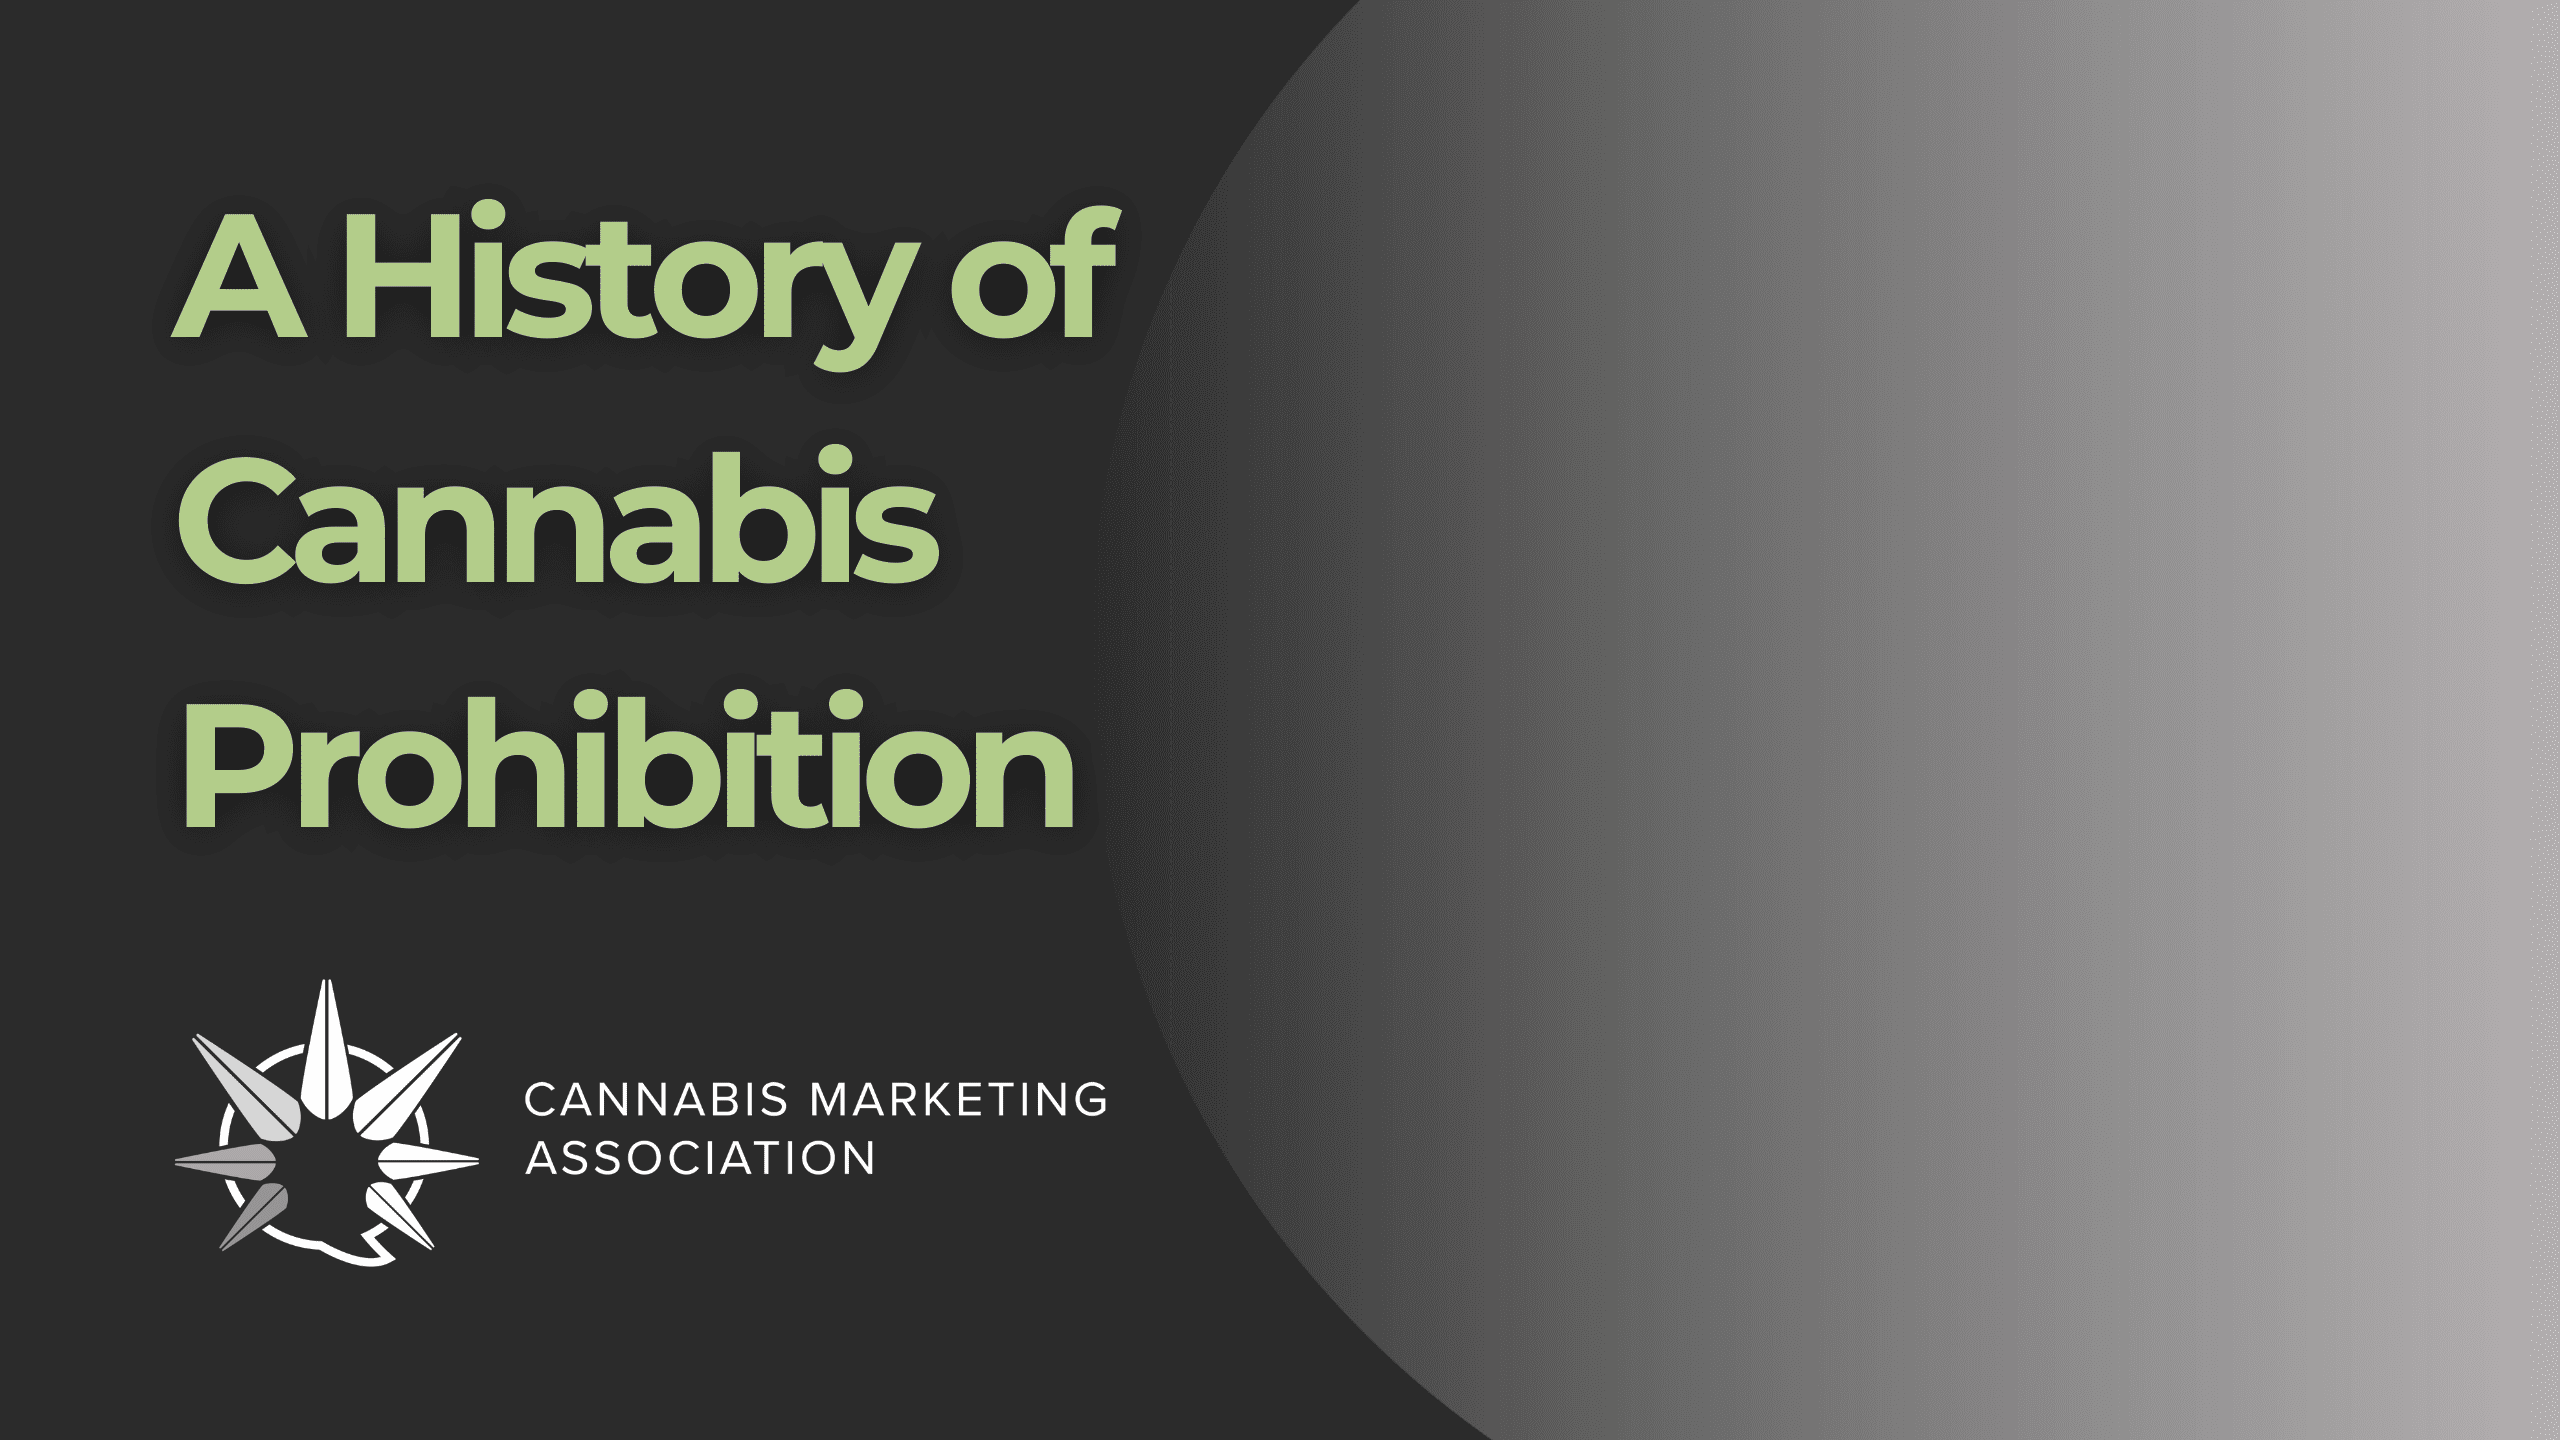 A History of Cannabis Prohibition